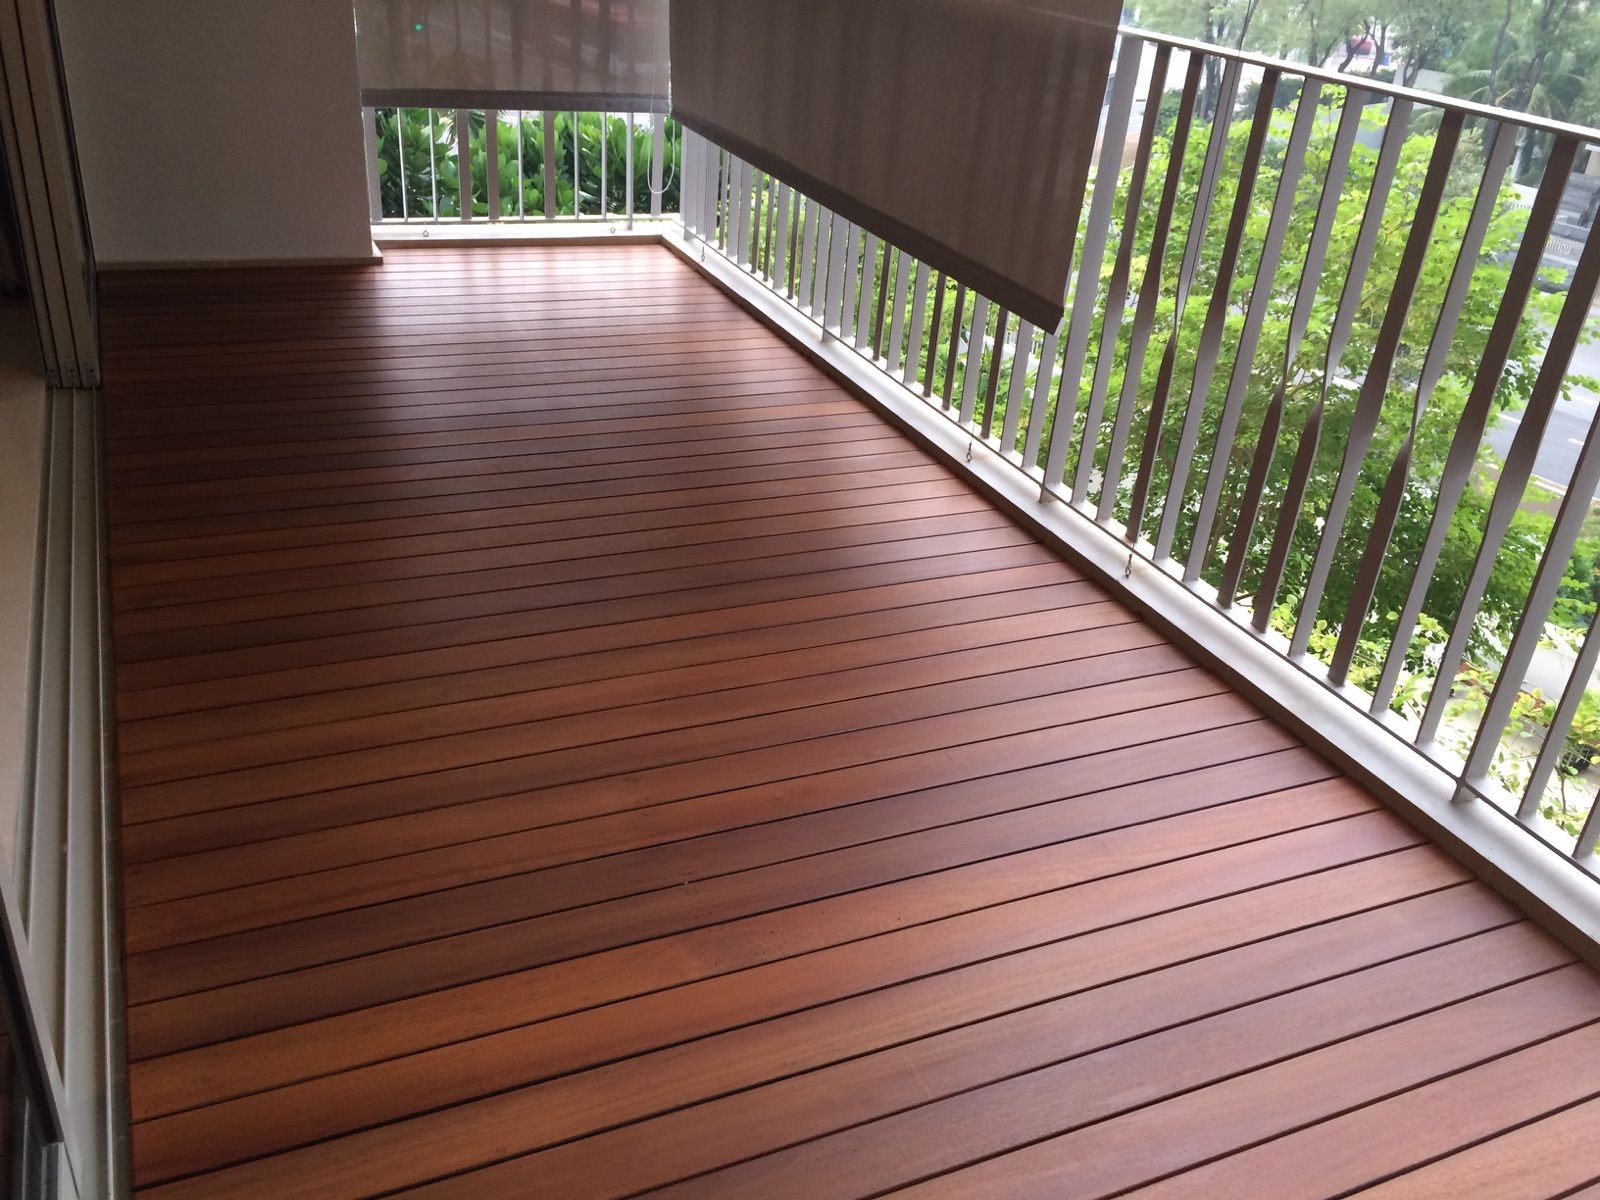 Composite Decking Tiles Prices Wpc Decking Composite Deck intended for size 1600 X 1200